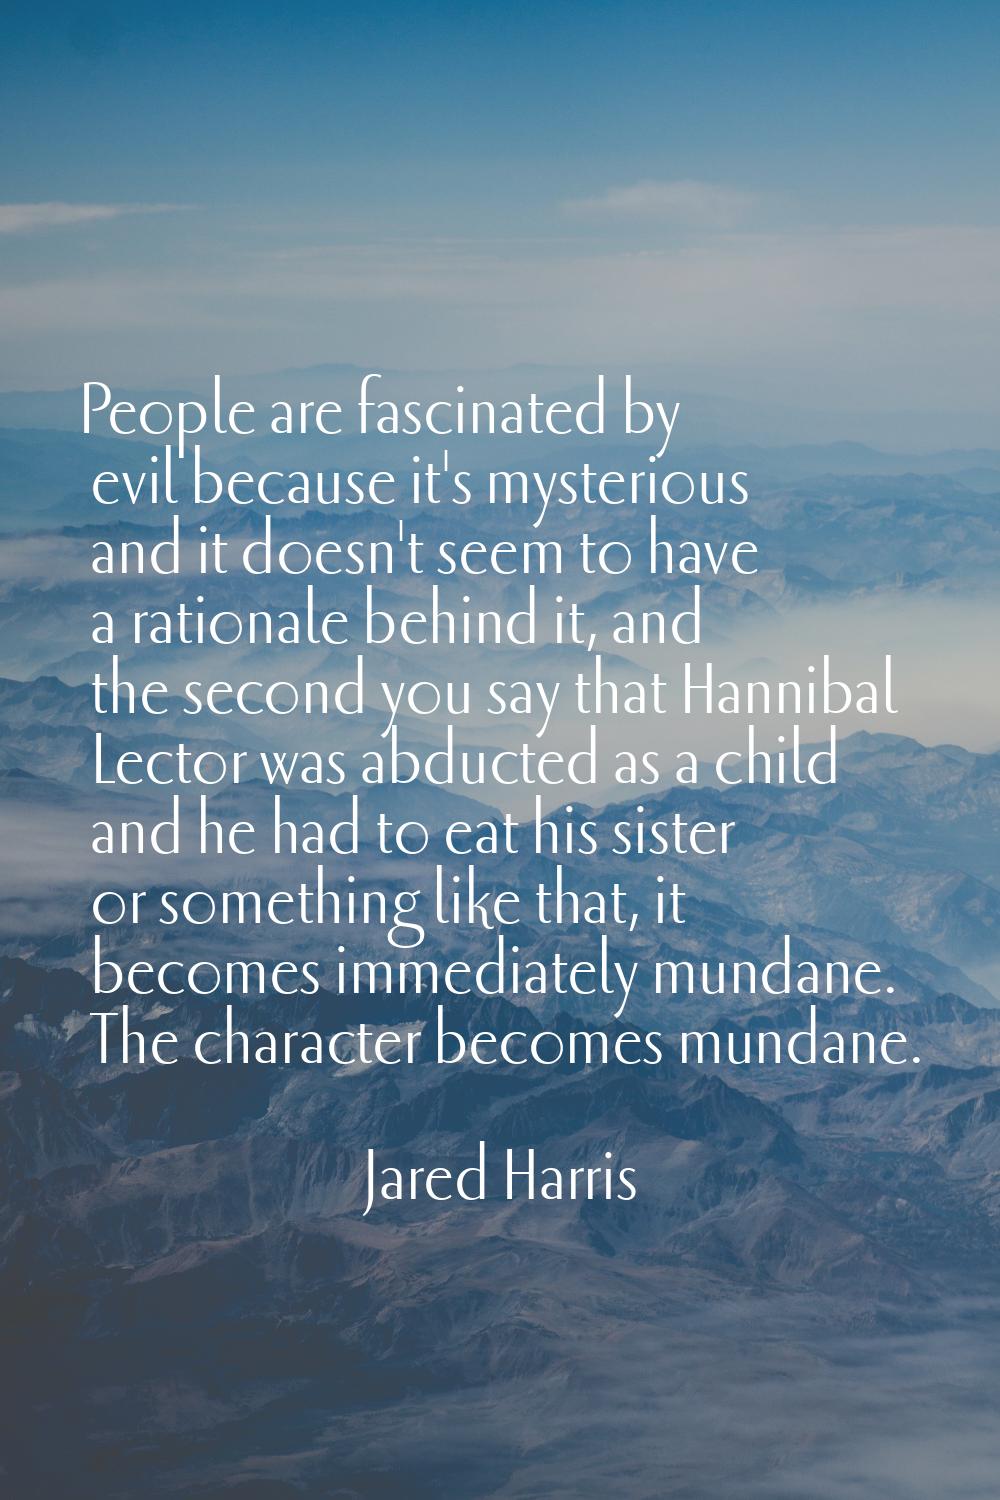 People are fascinated by evil because it's mysterious and it doesn't seem to have a rationale behin